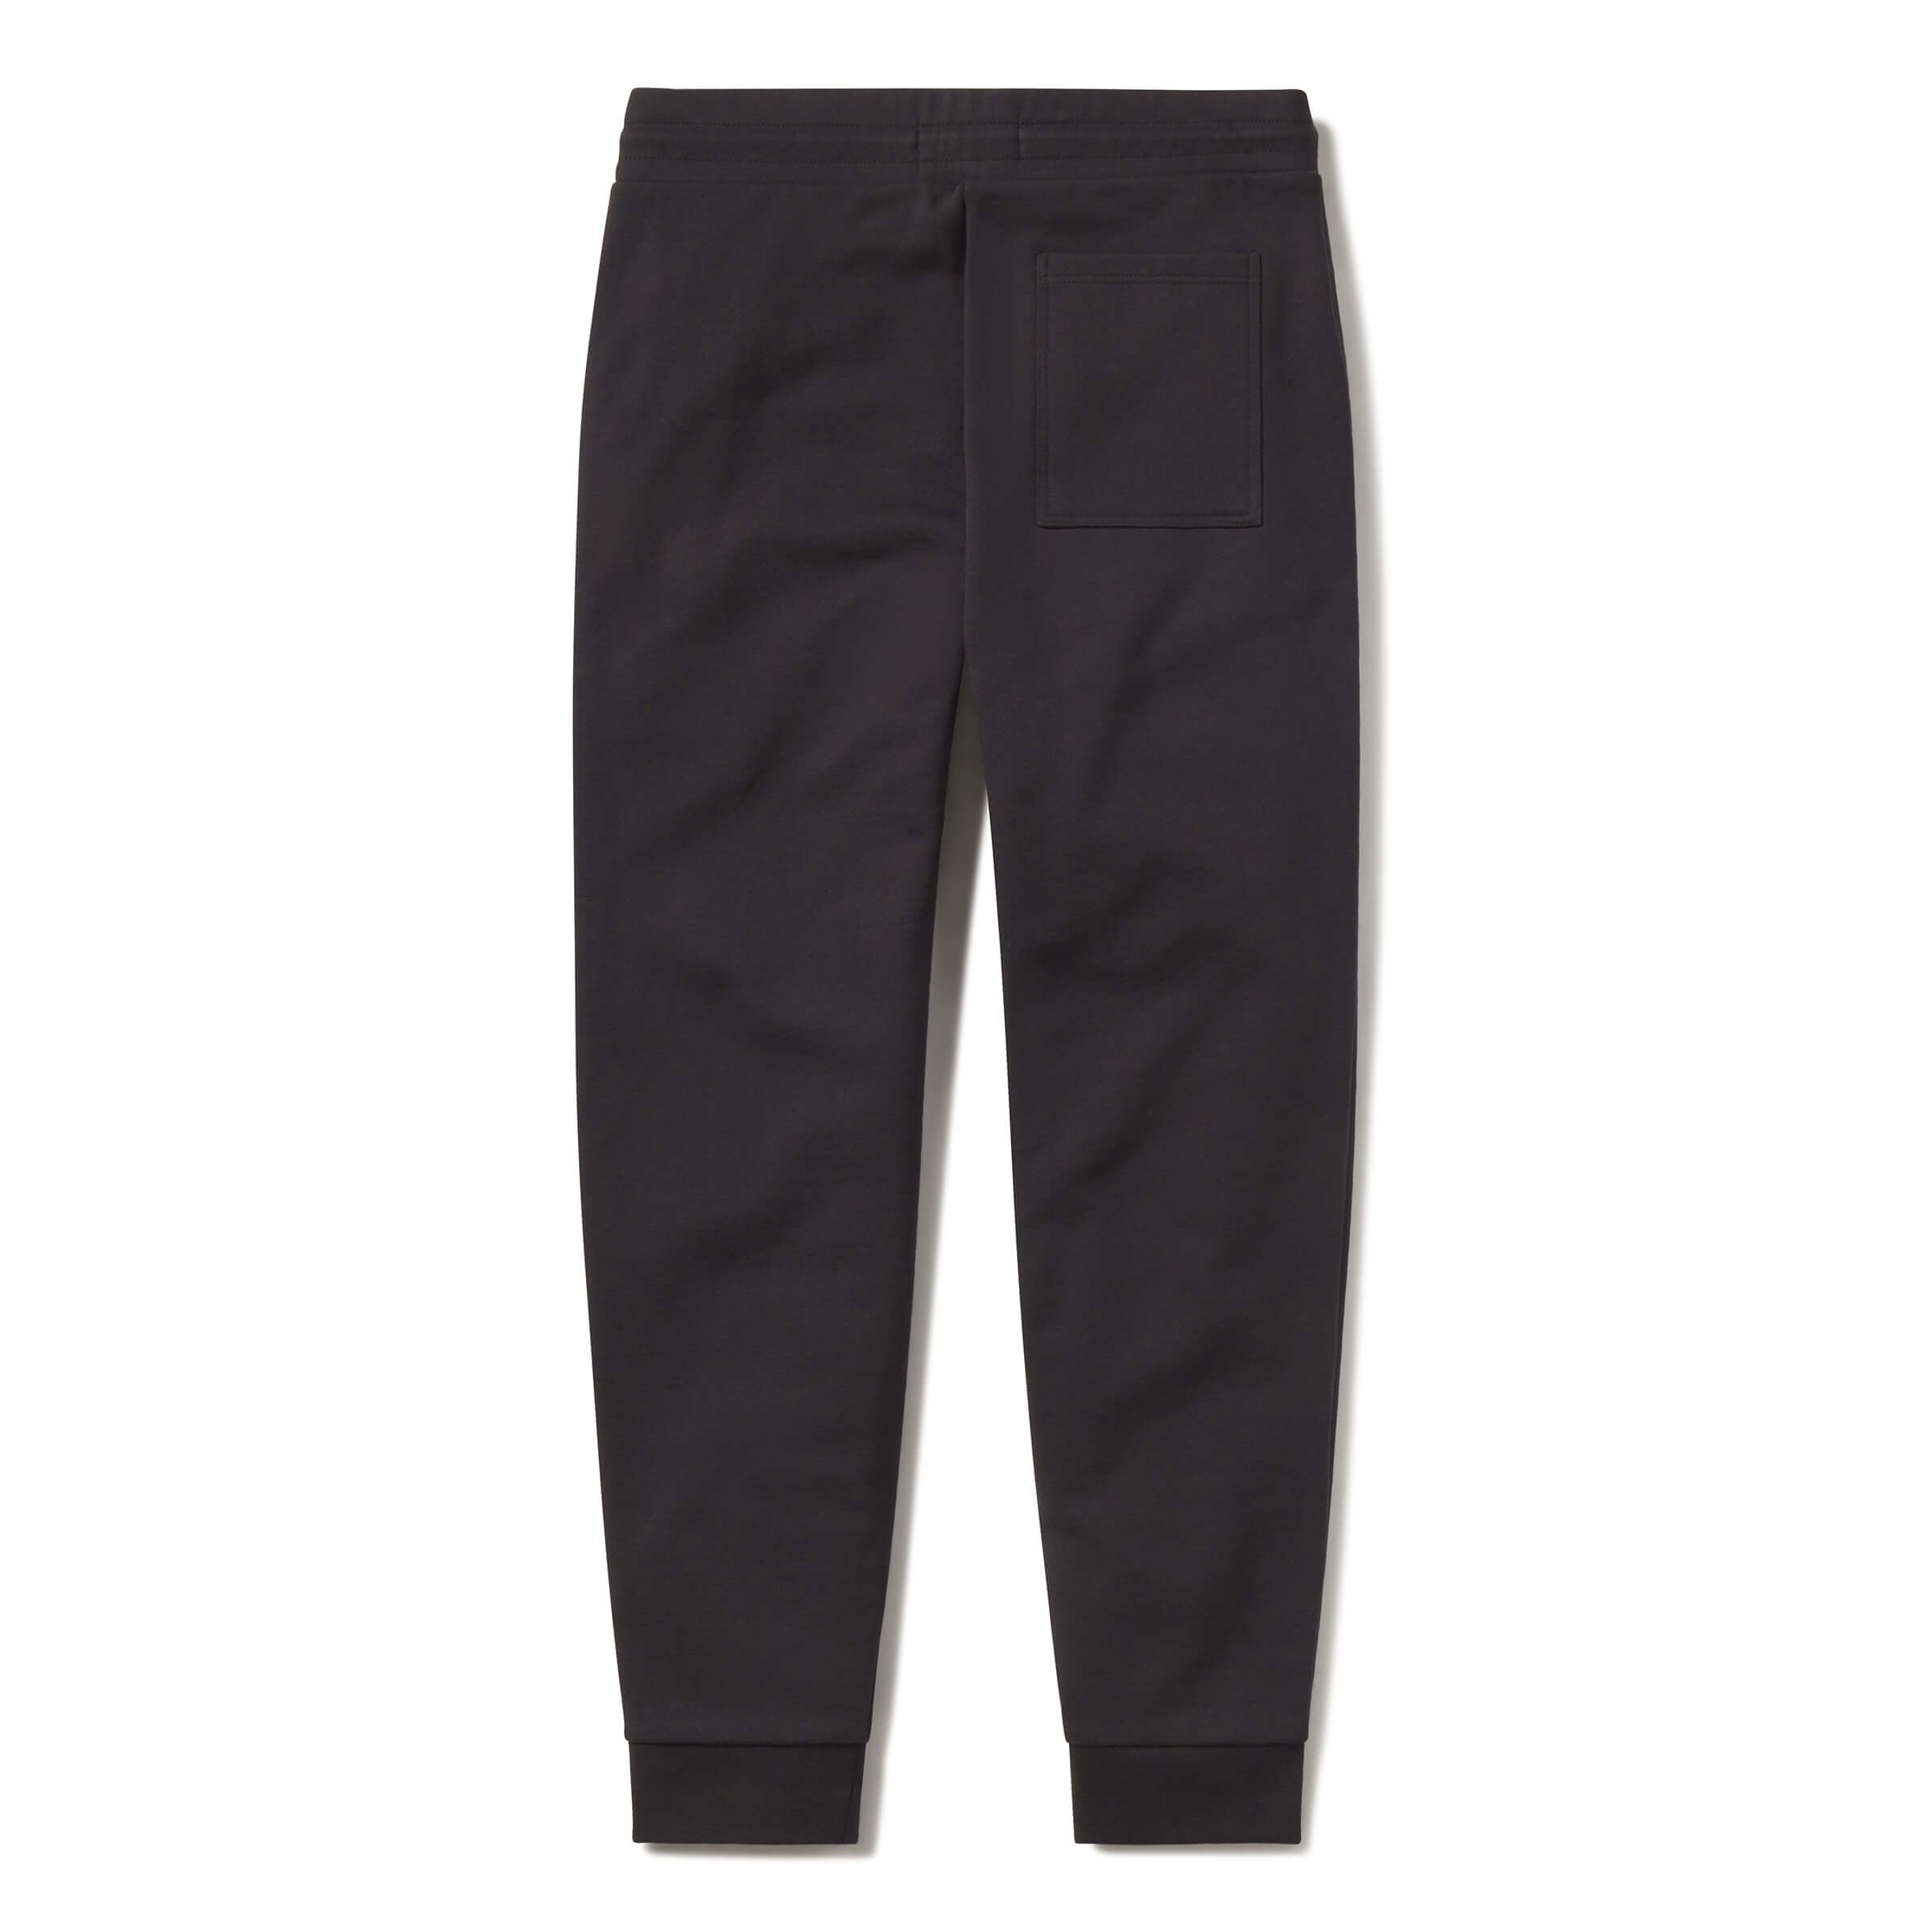 Men wearing Gris oscuro The French Terry Sweatpant Hooper